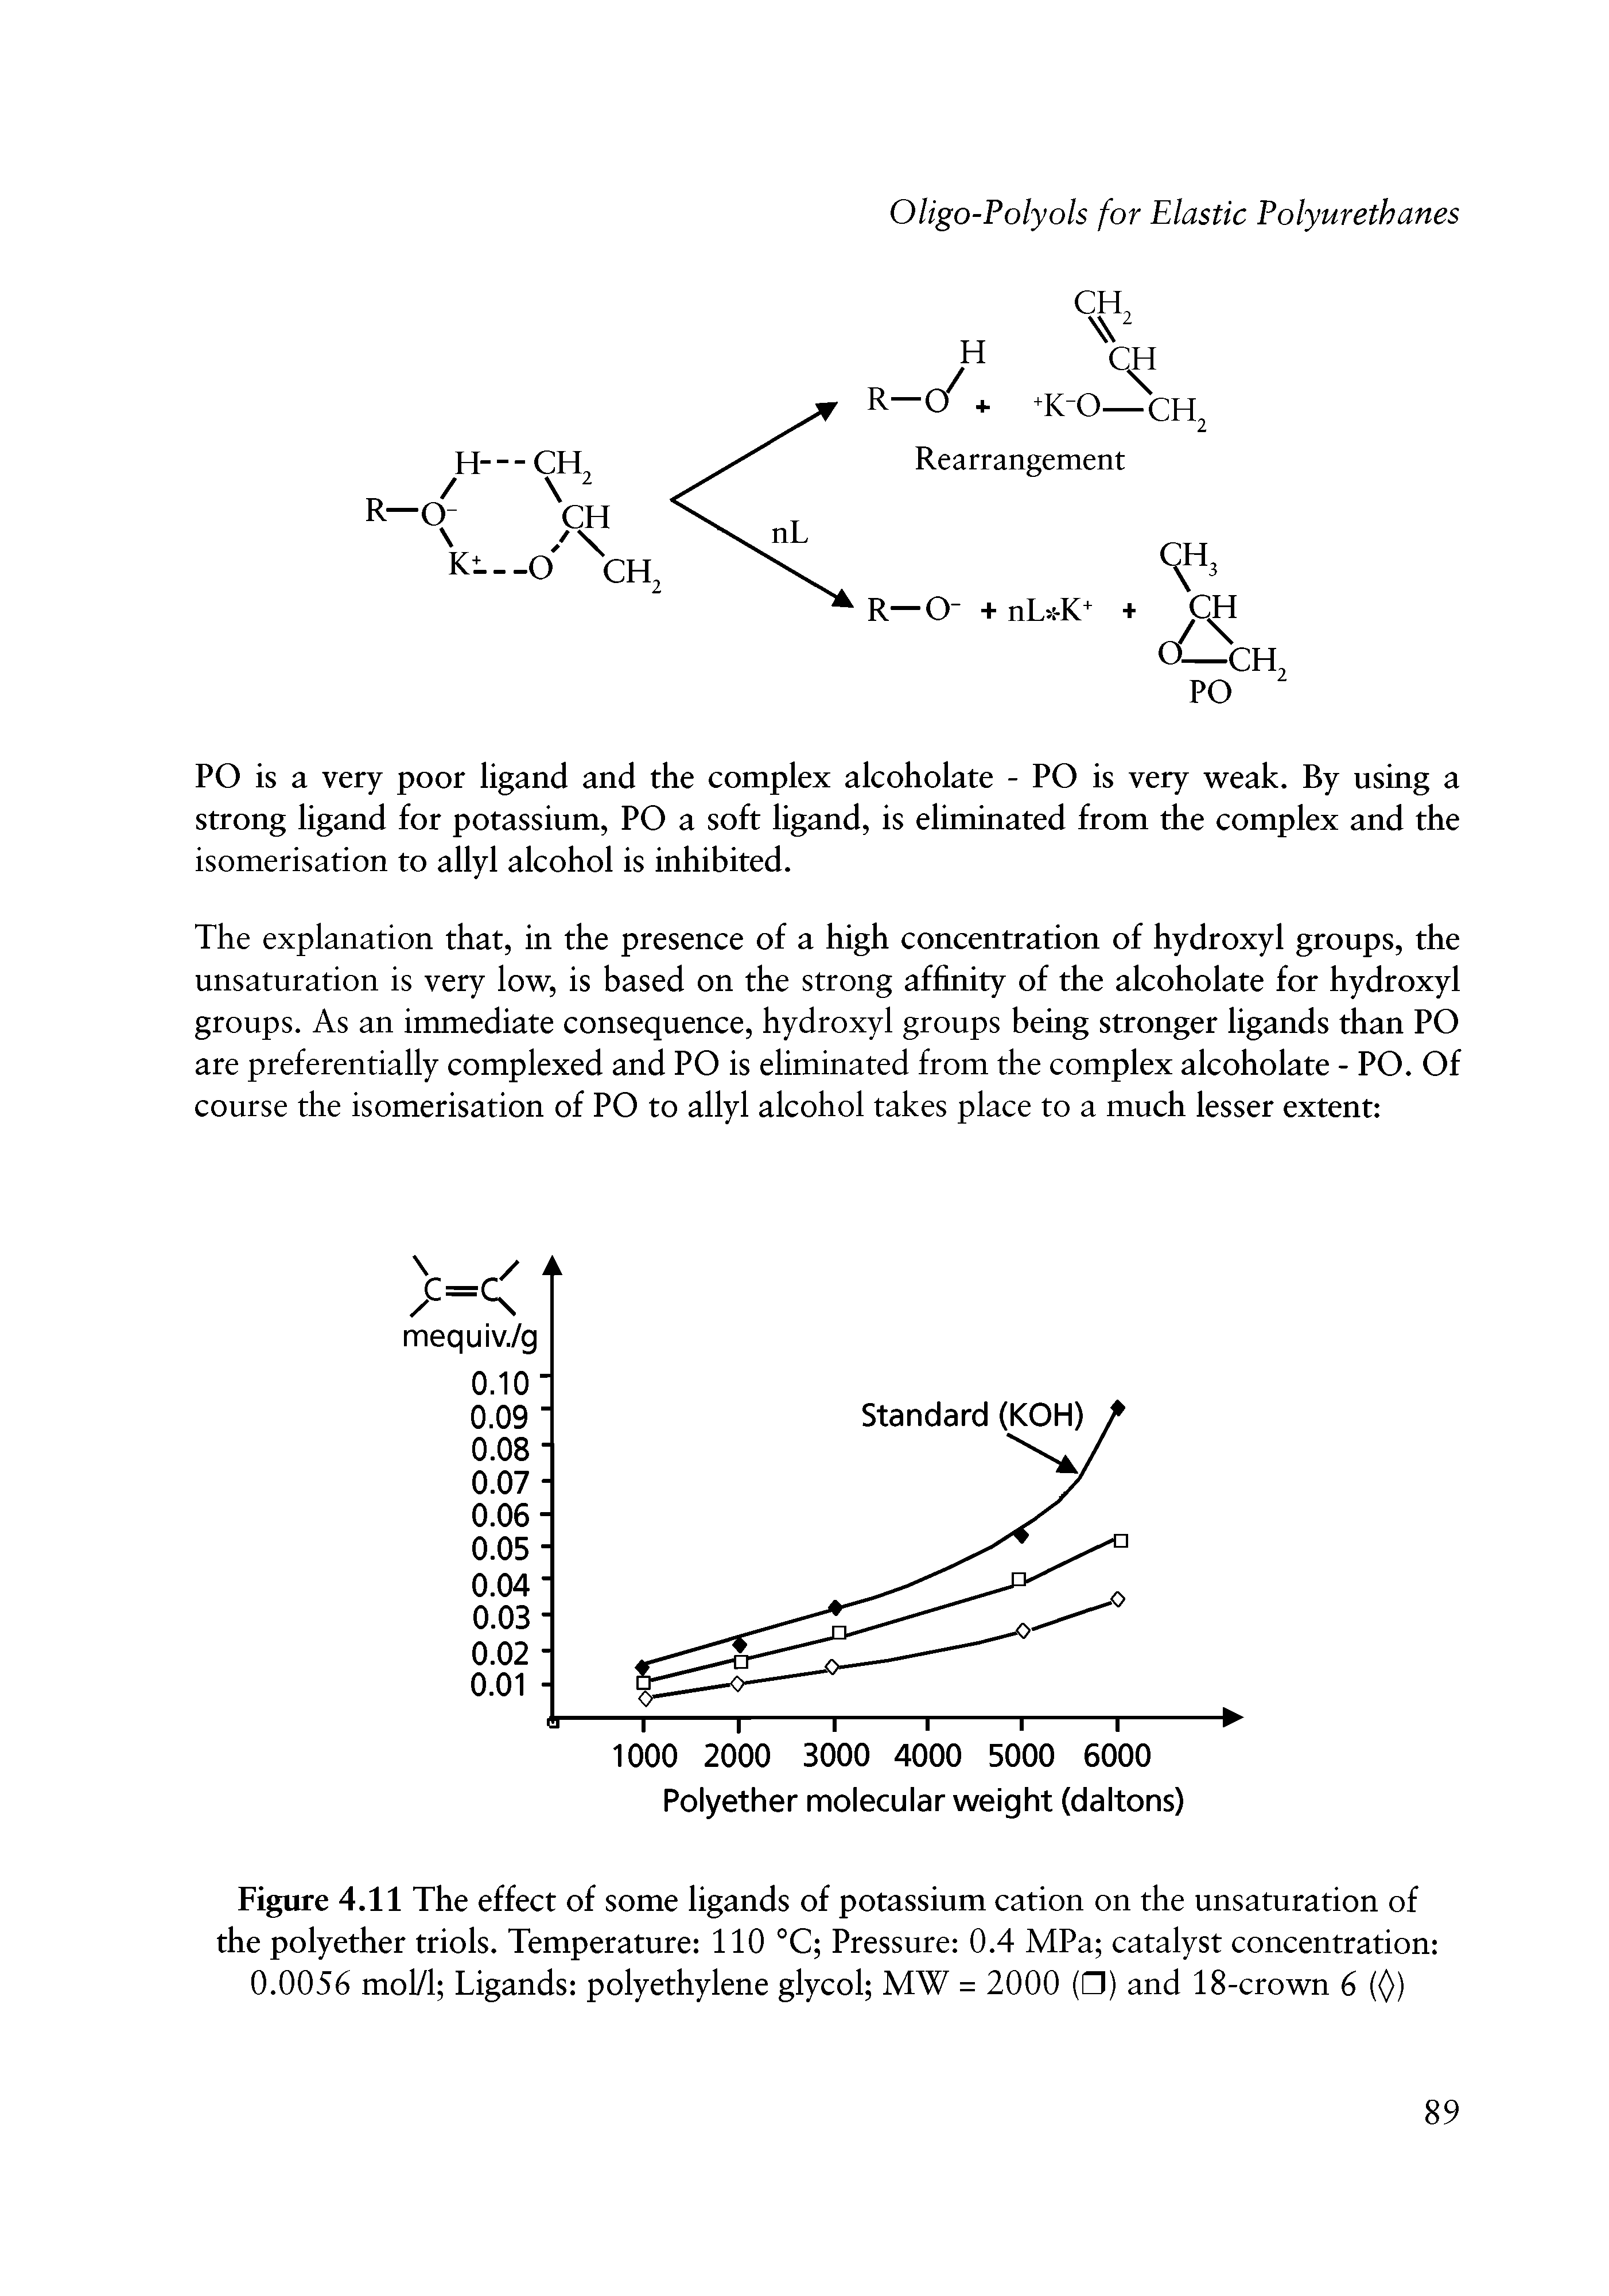 Figure 4.11 The effect of some ligands of potassium cation on the unsaturation of the polyether triols. Temperature 110 °C Pressure 0.4 MPa catalyst concentration 0.0056 mol/1 Ligands polyethylene glycol MW = 2000 ( ) and 18-crown 6 (())...